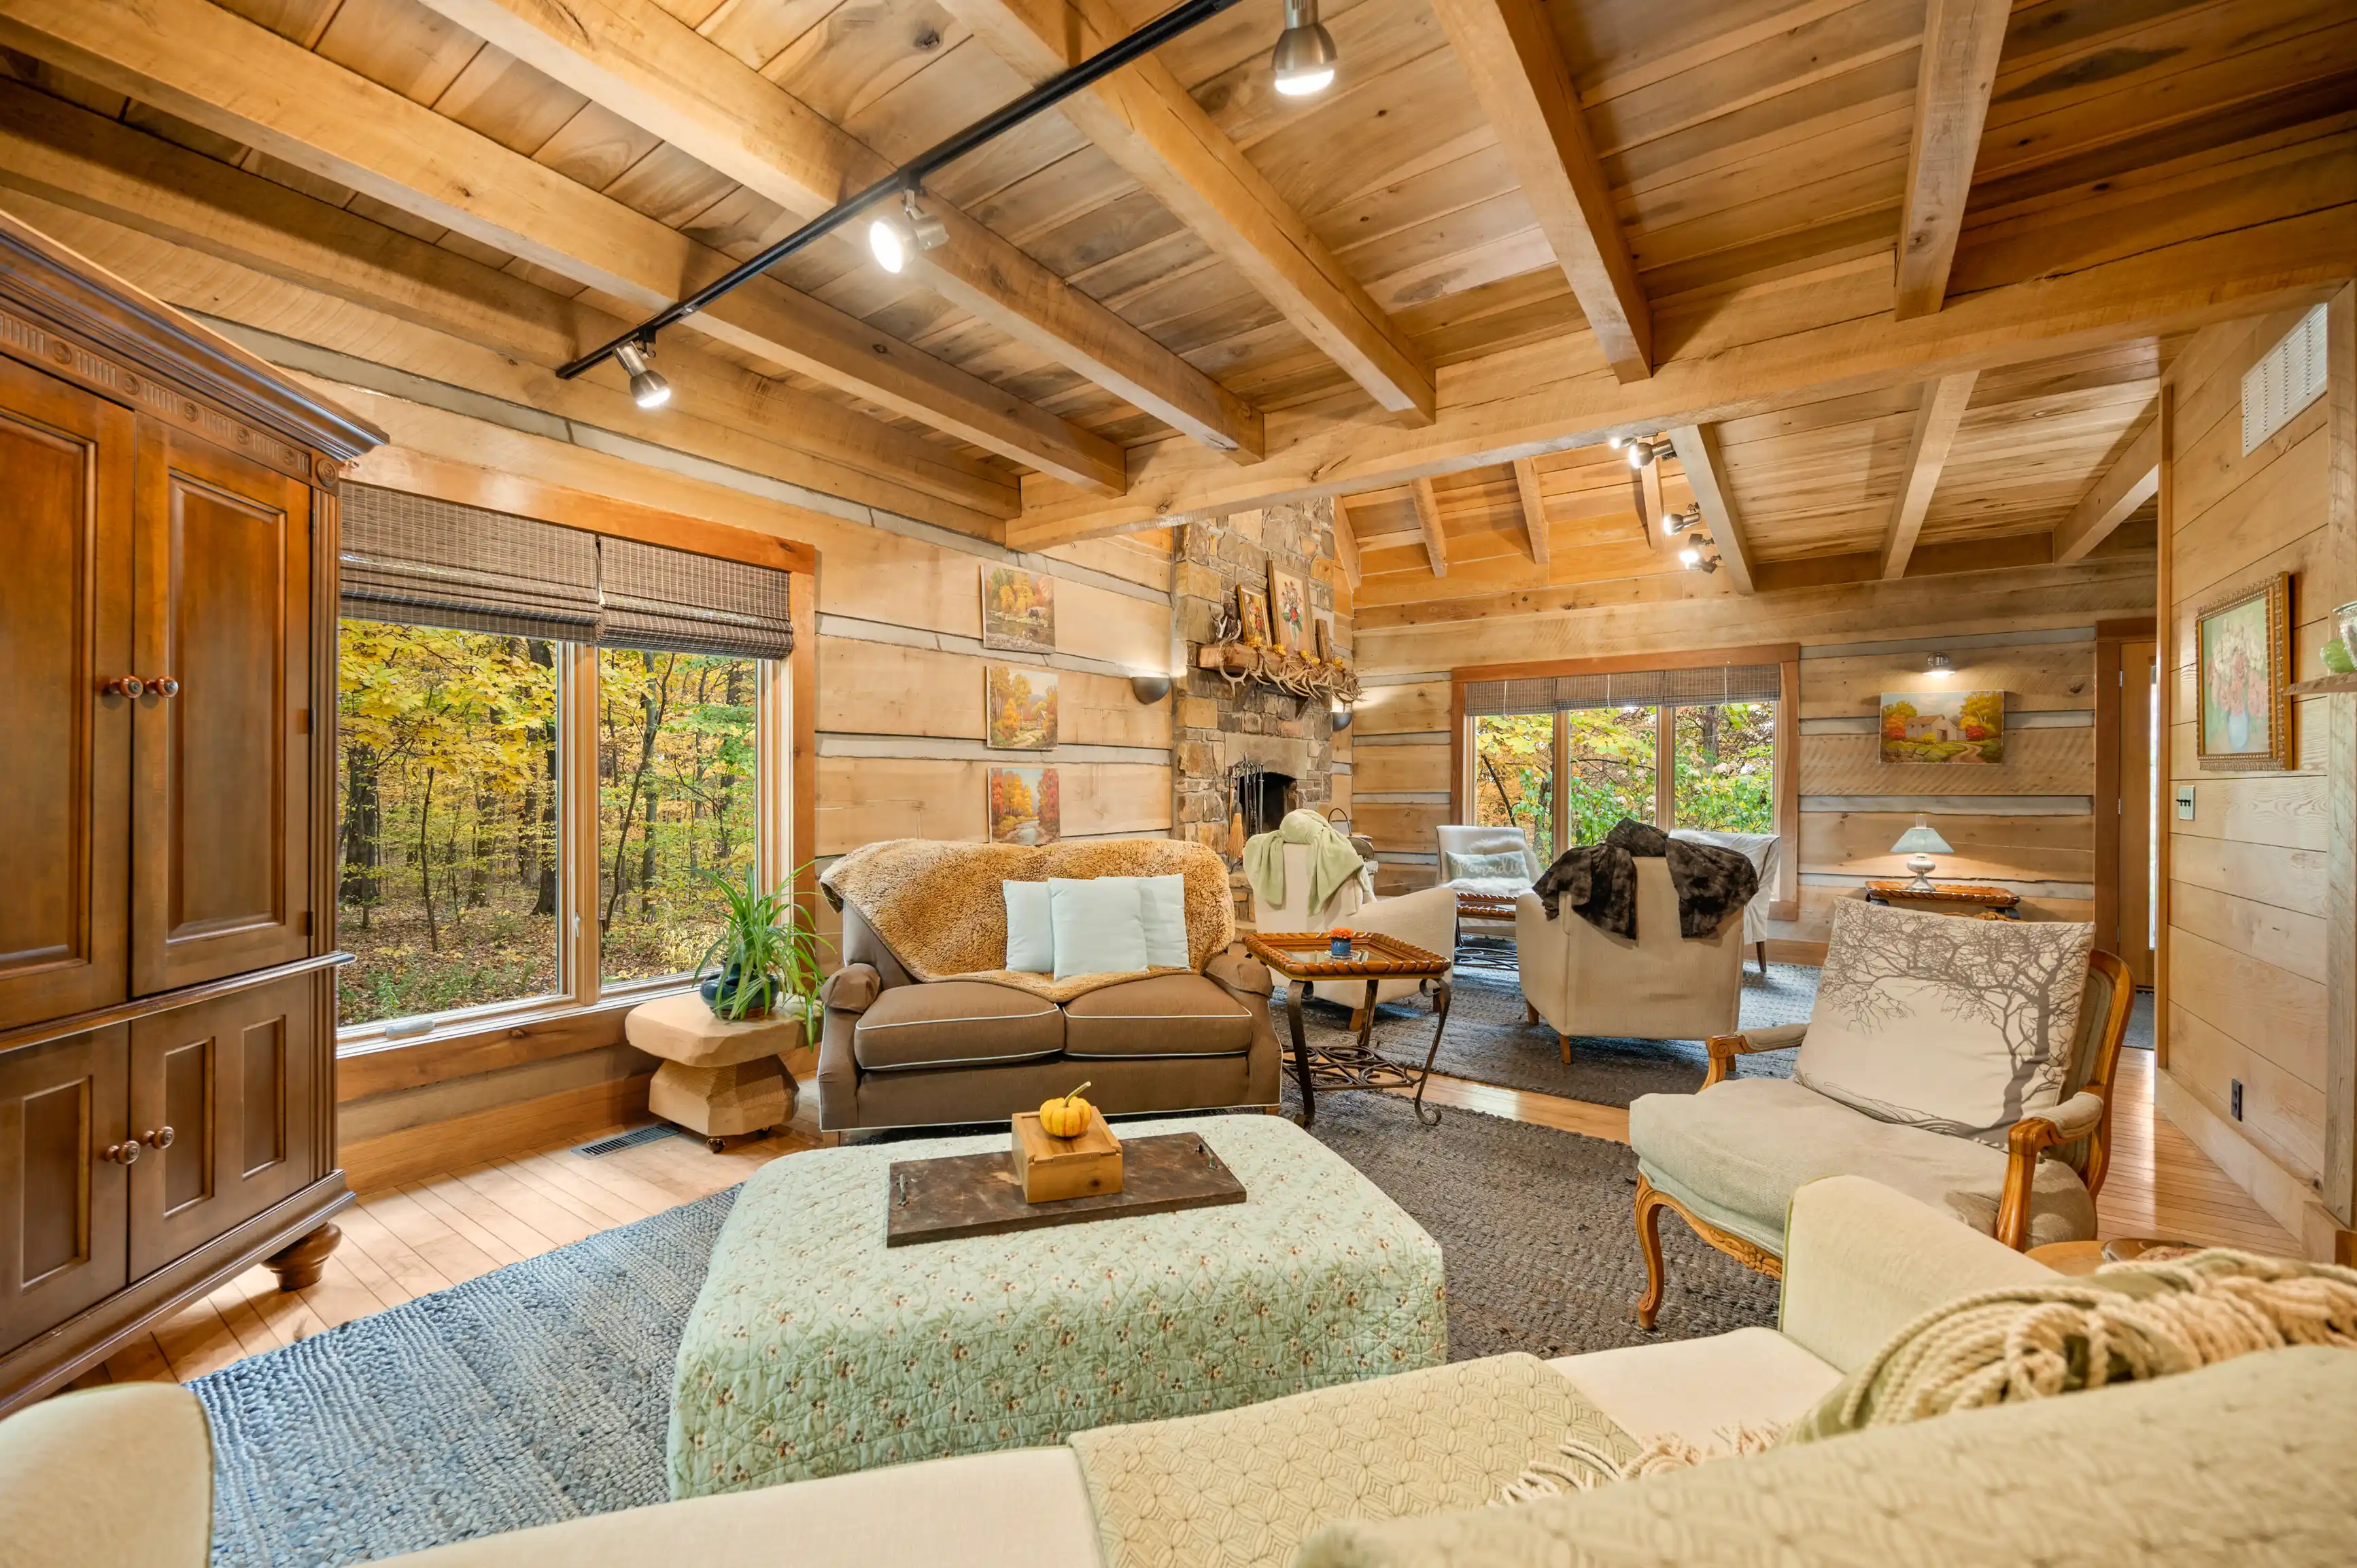 Cozy rustic living room with wooden walls, exposed beams, a stone fireplace, and large windows with a forest view.